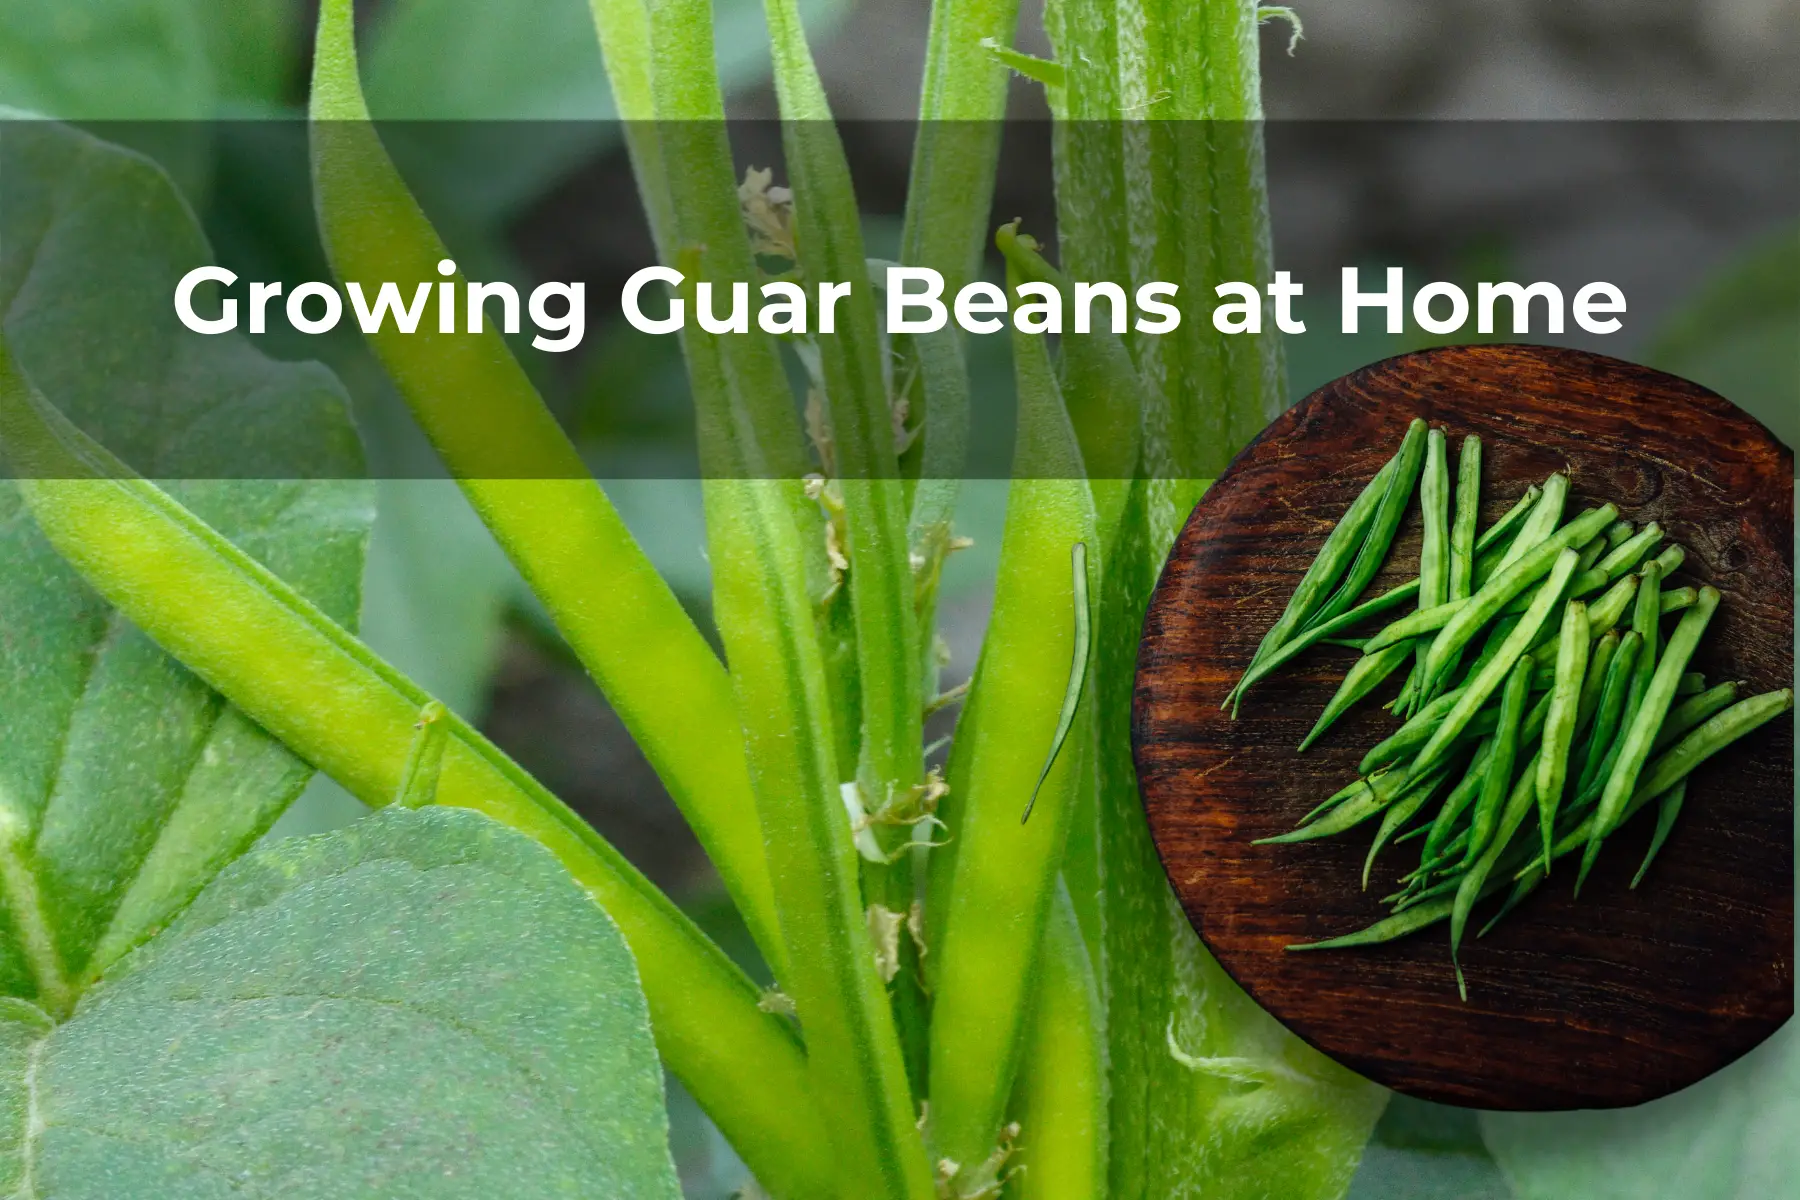 Growing Guar Beans at Home